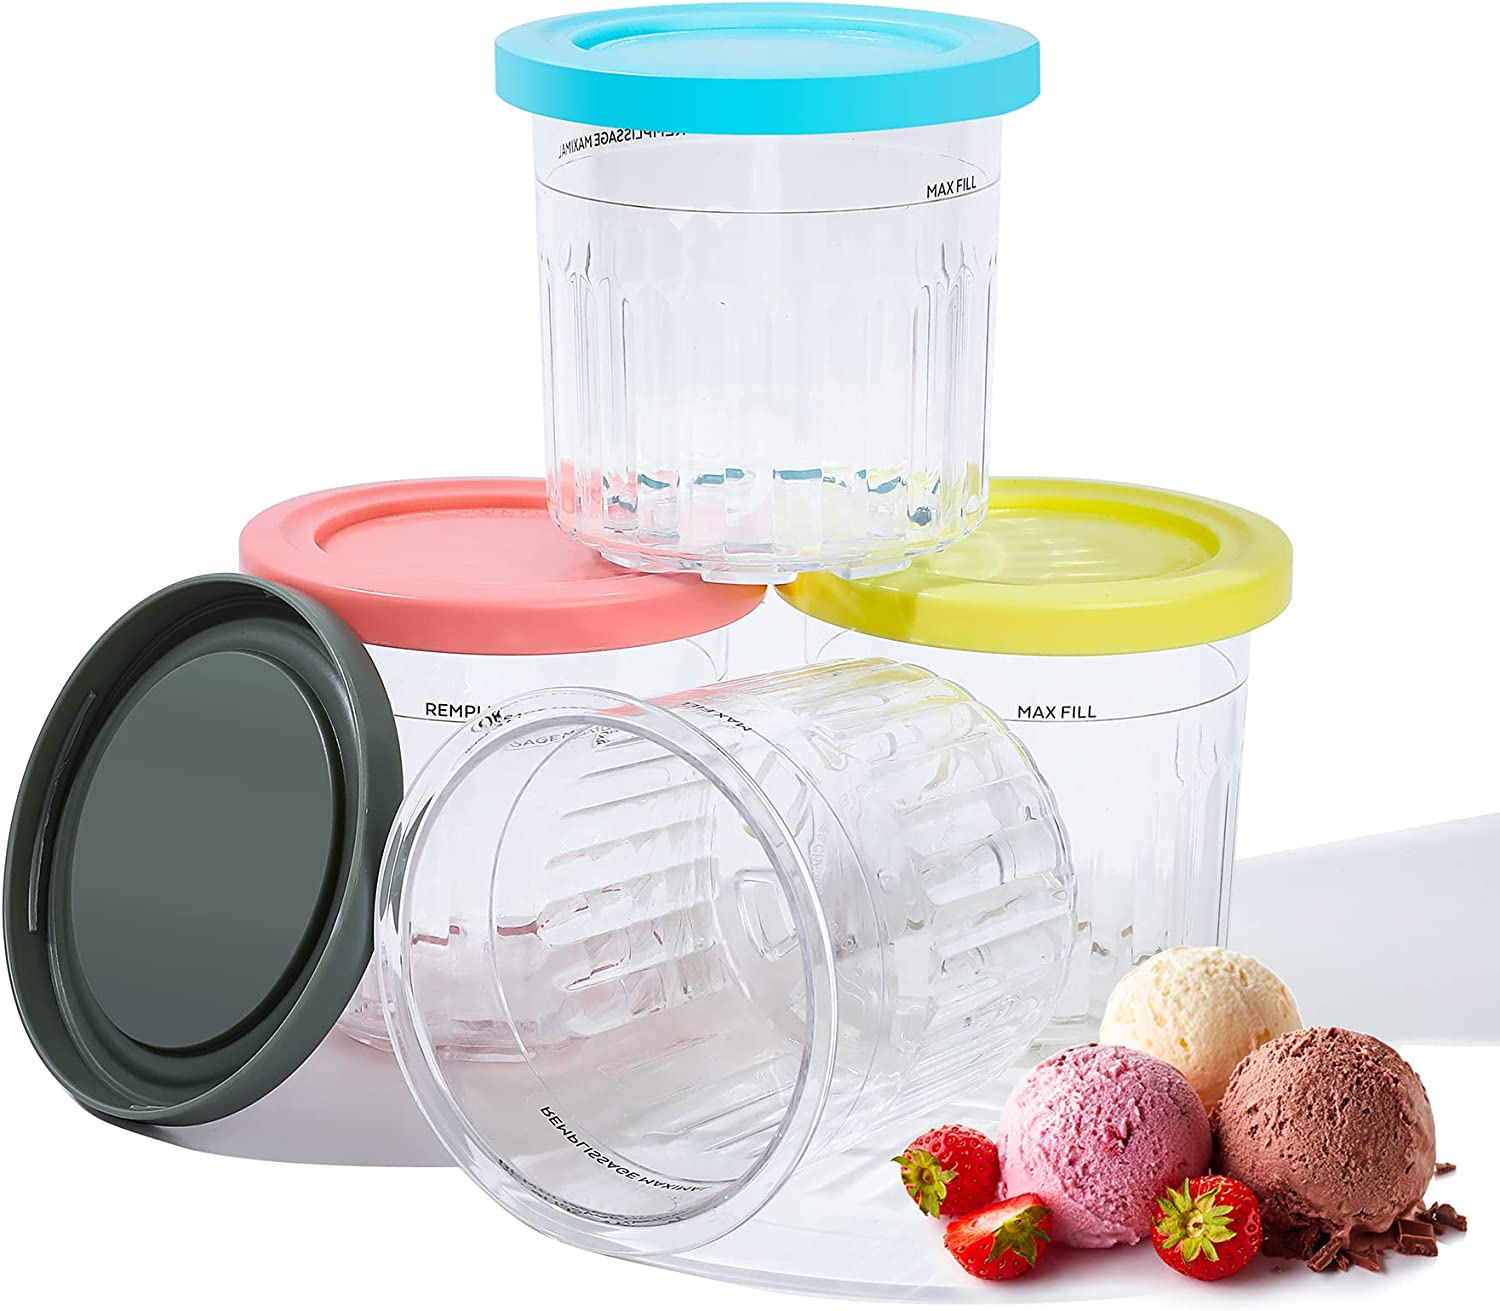 Hatende Creami Pint Containers Review - Super Deal Day: Premium